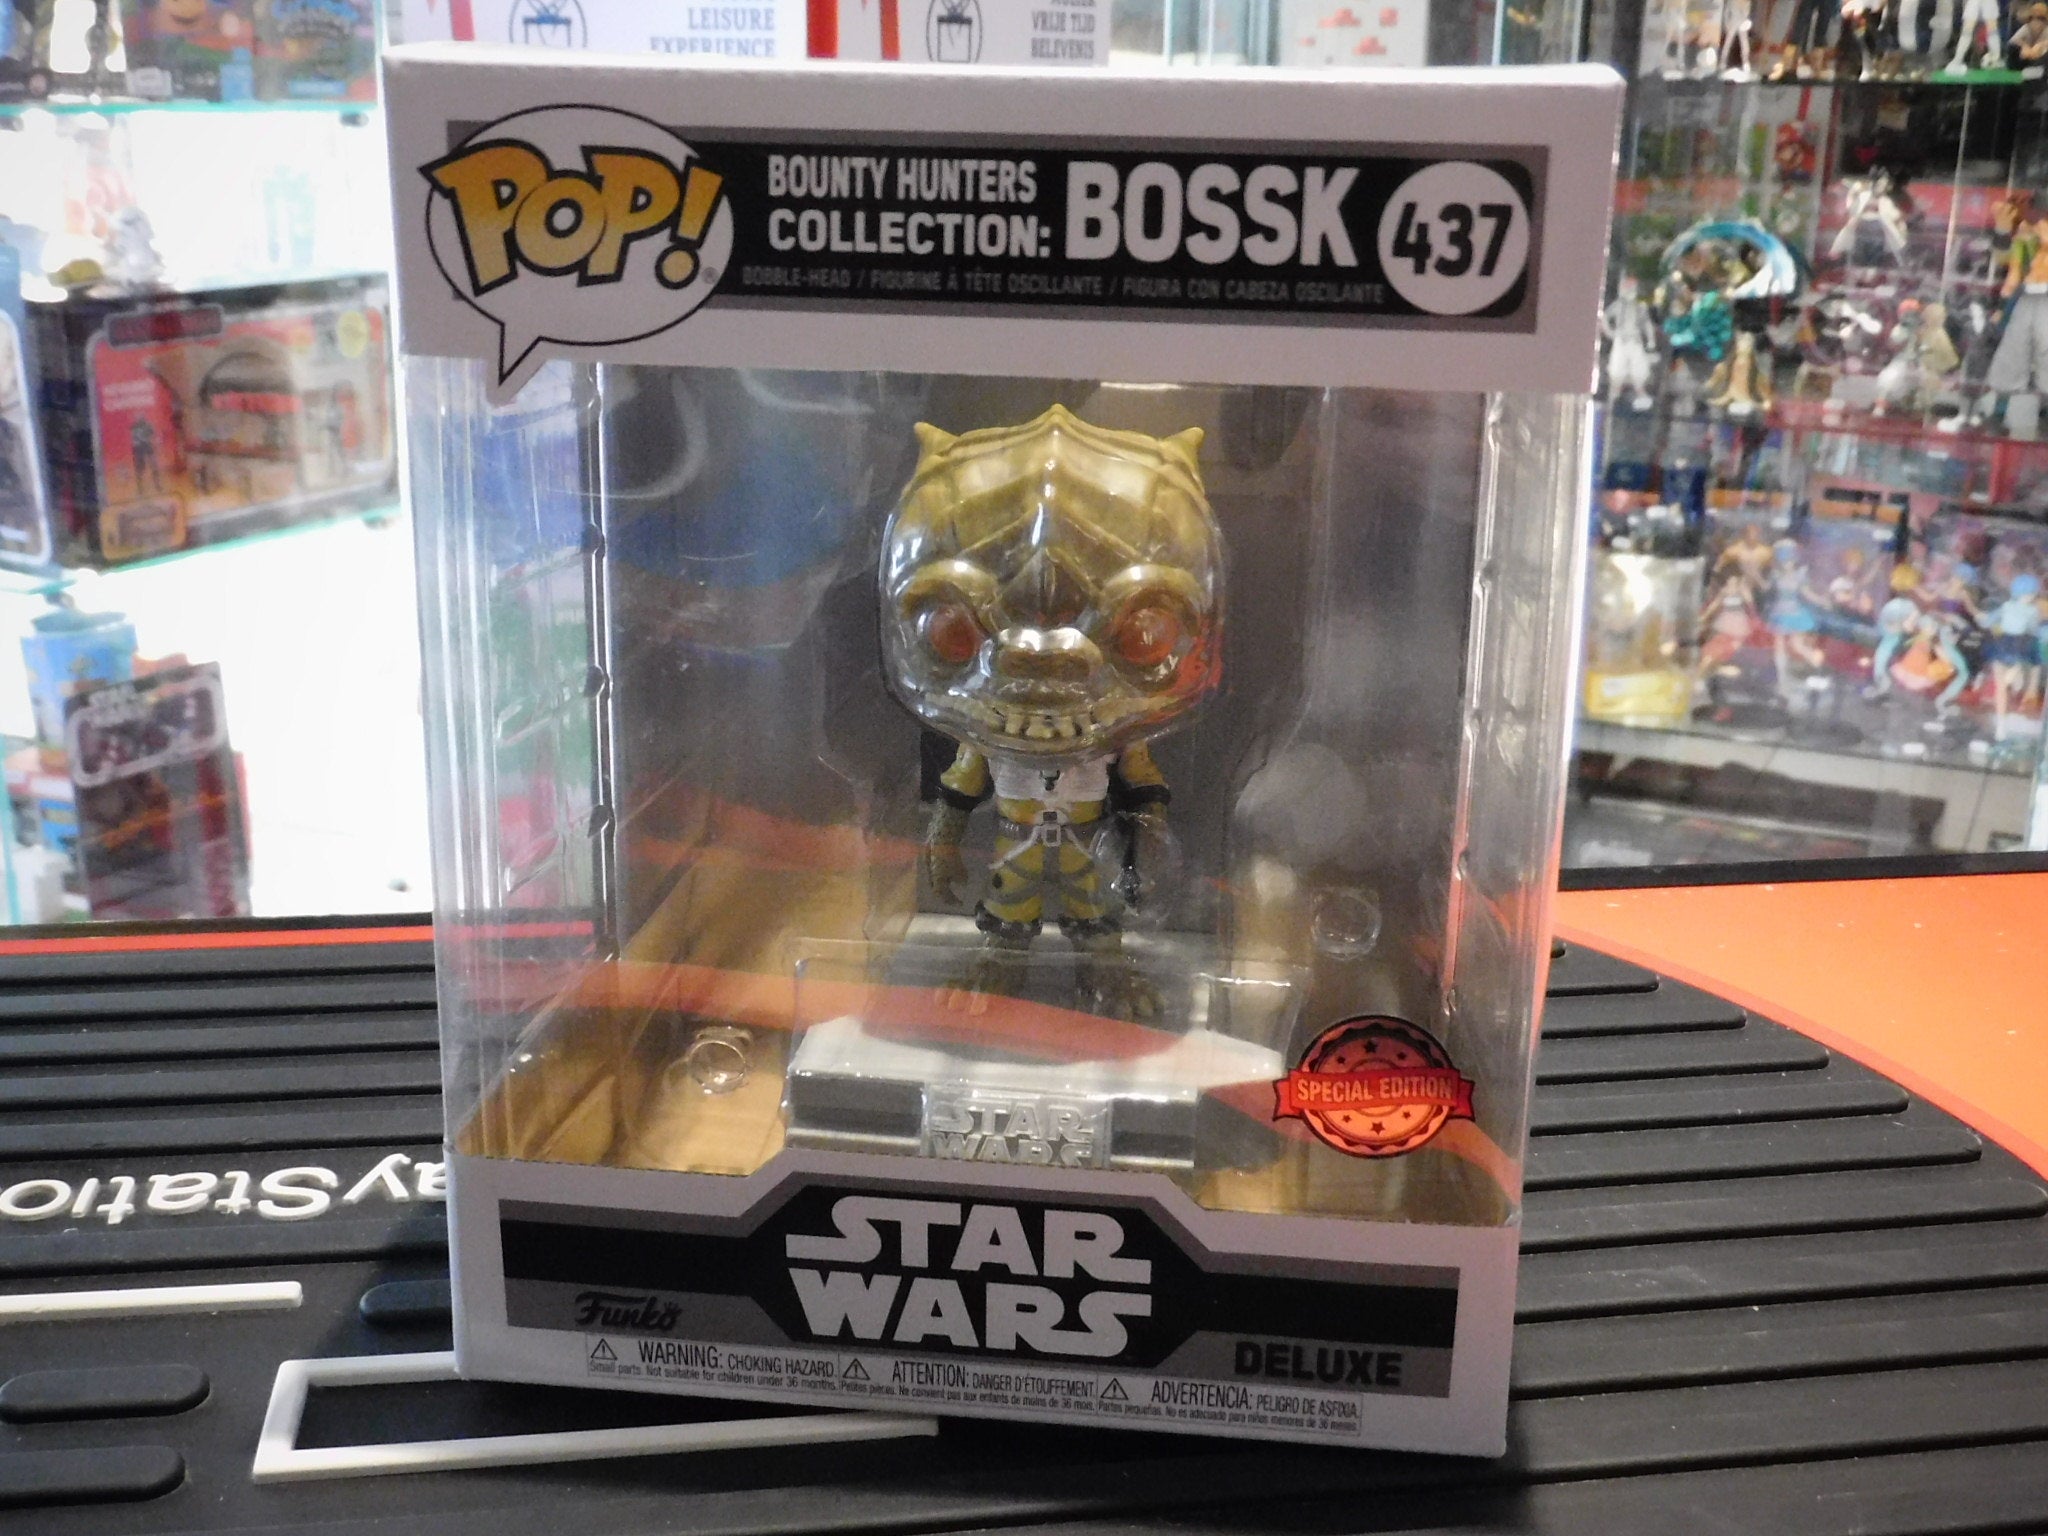 POP! BOUNTY HUNTERS COLLECTION BOSSK 437